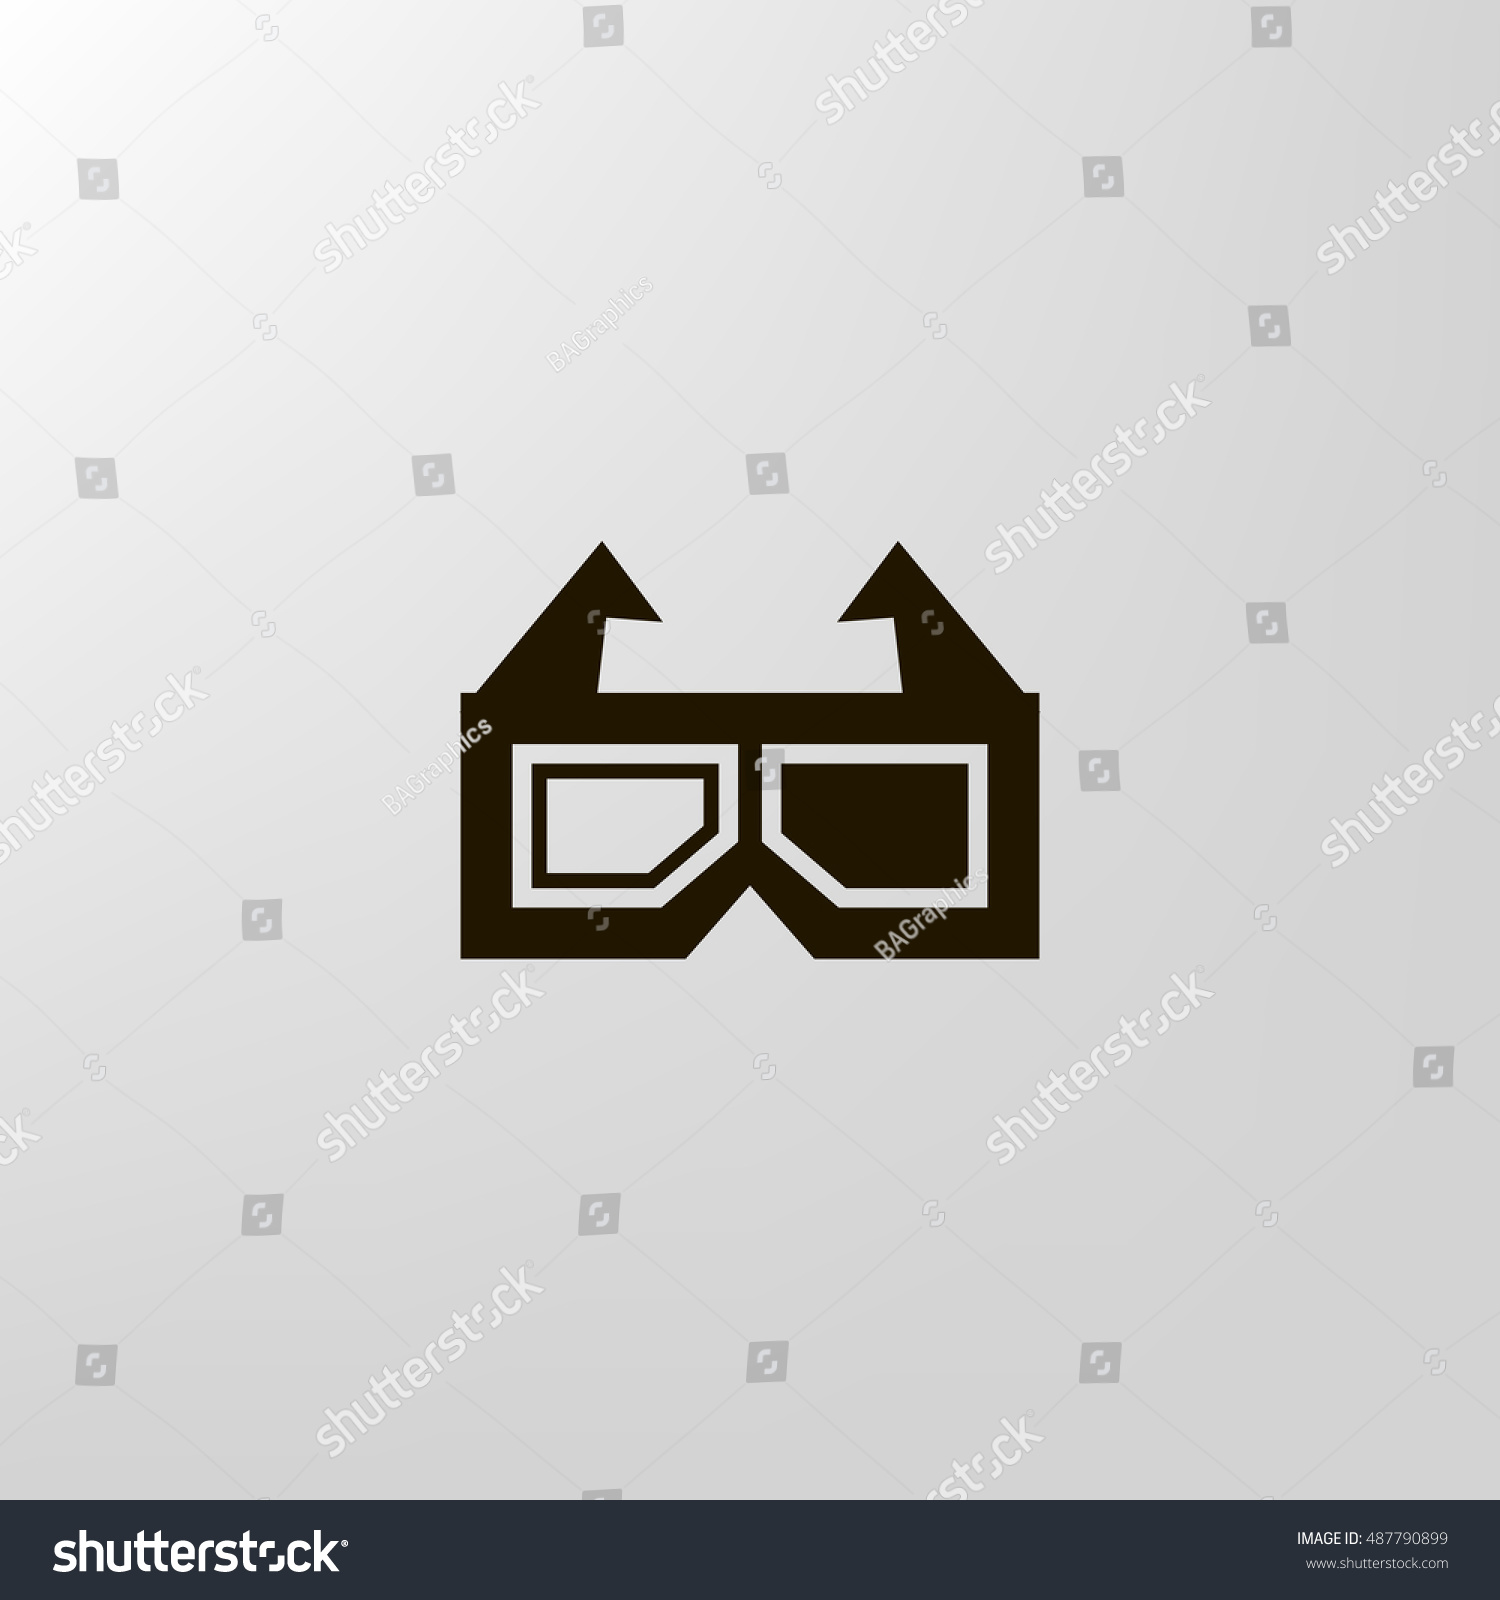 Download 3d Glasses Icon Vector Clip Art Stock Vector Royalty Free 487790899